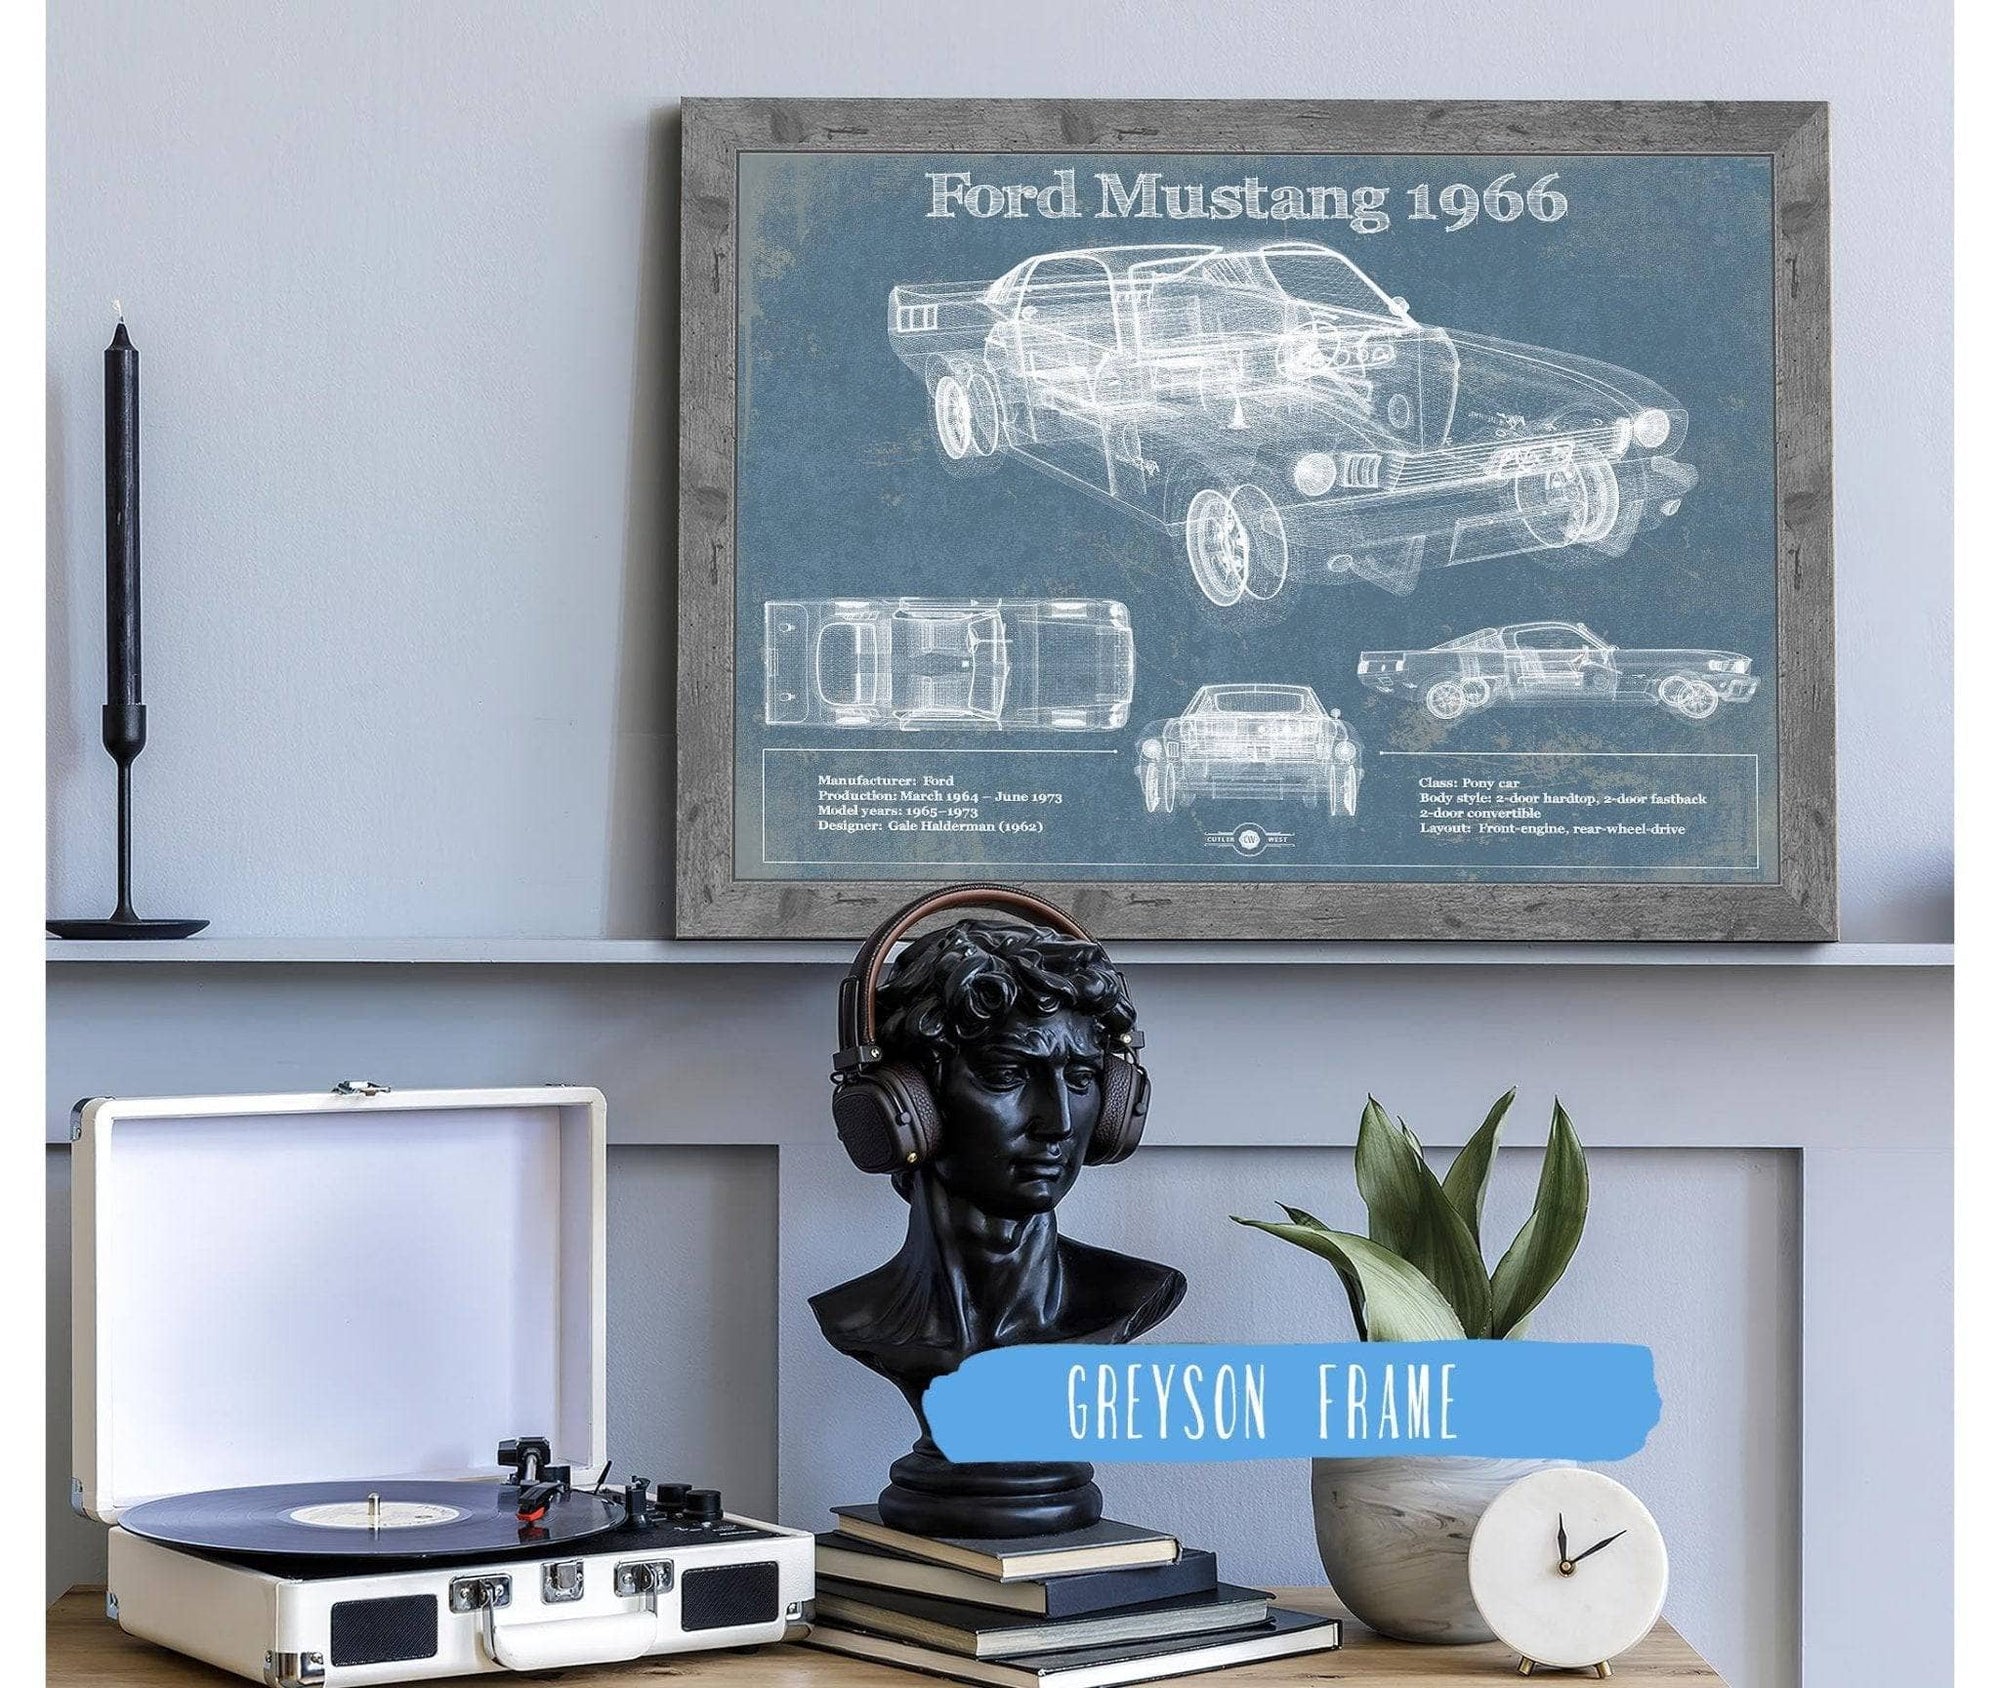 Cutler West Ford Collection 20" x 16" / Greyson Frame Ford Mustang 1966 Original Blueprint Art 845000229-TOP